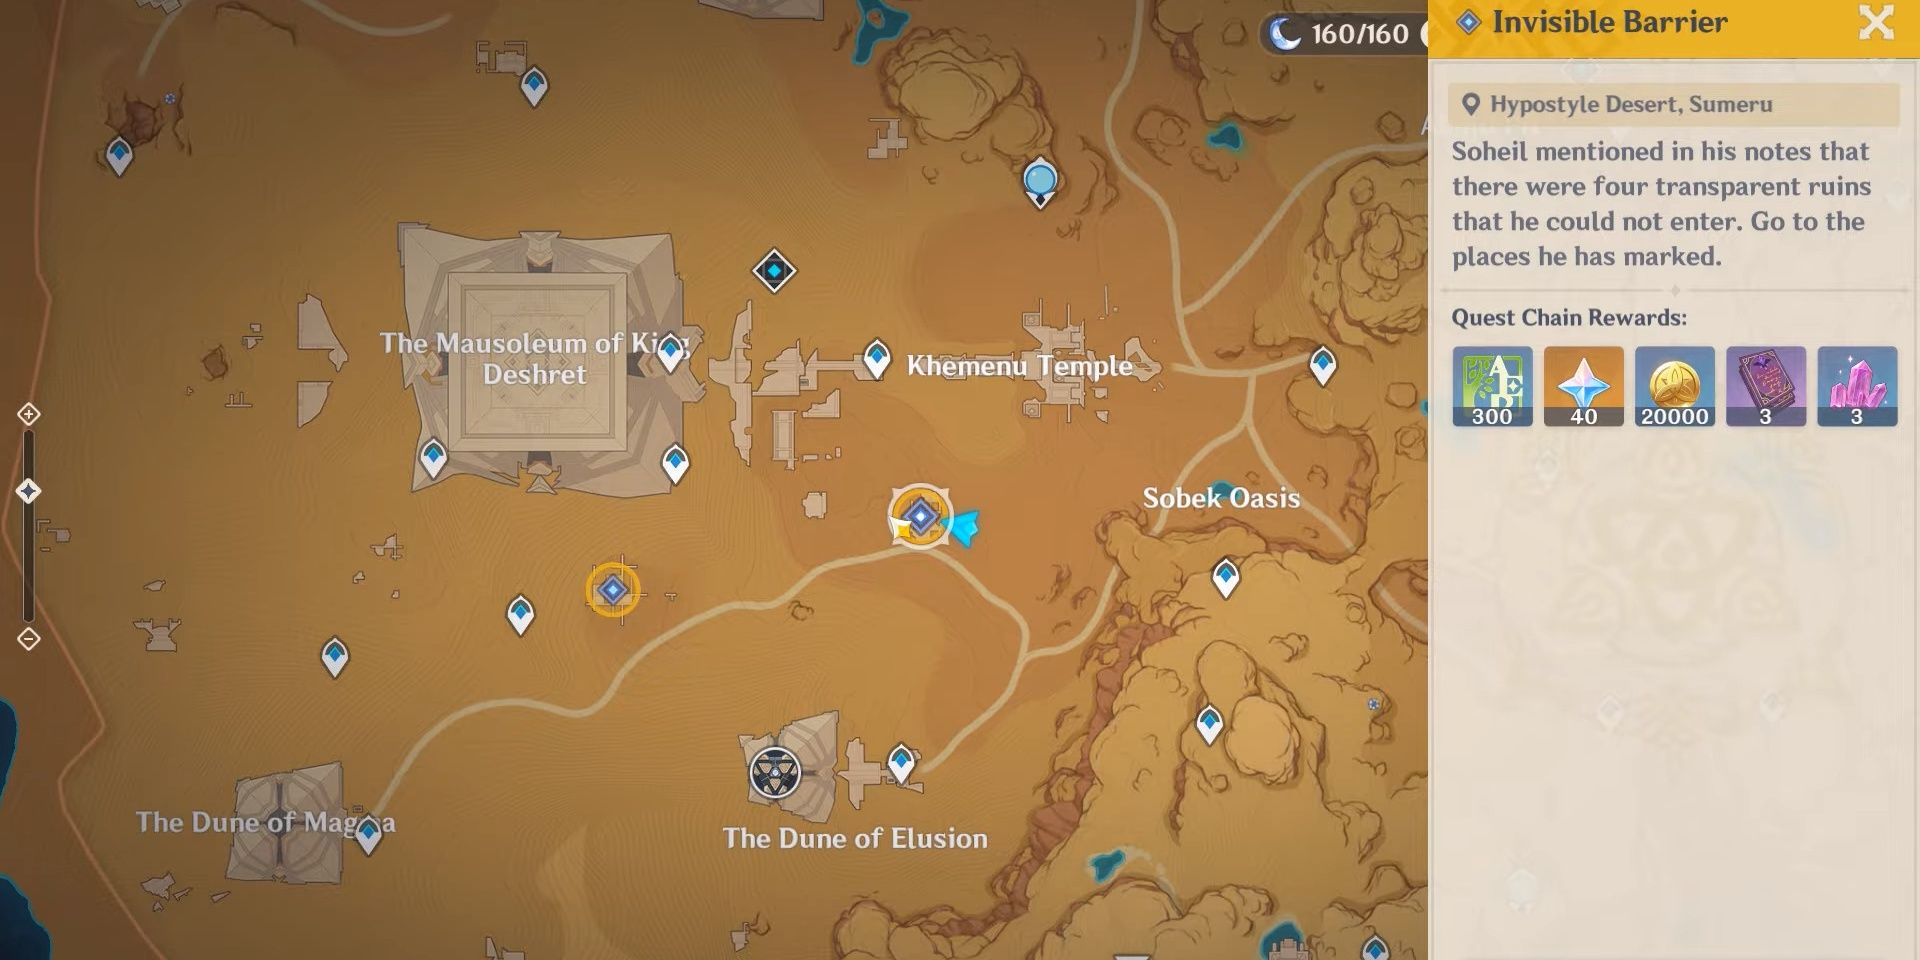 Image of the location on the third transparent relics map in Genshin Impact.